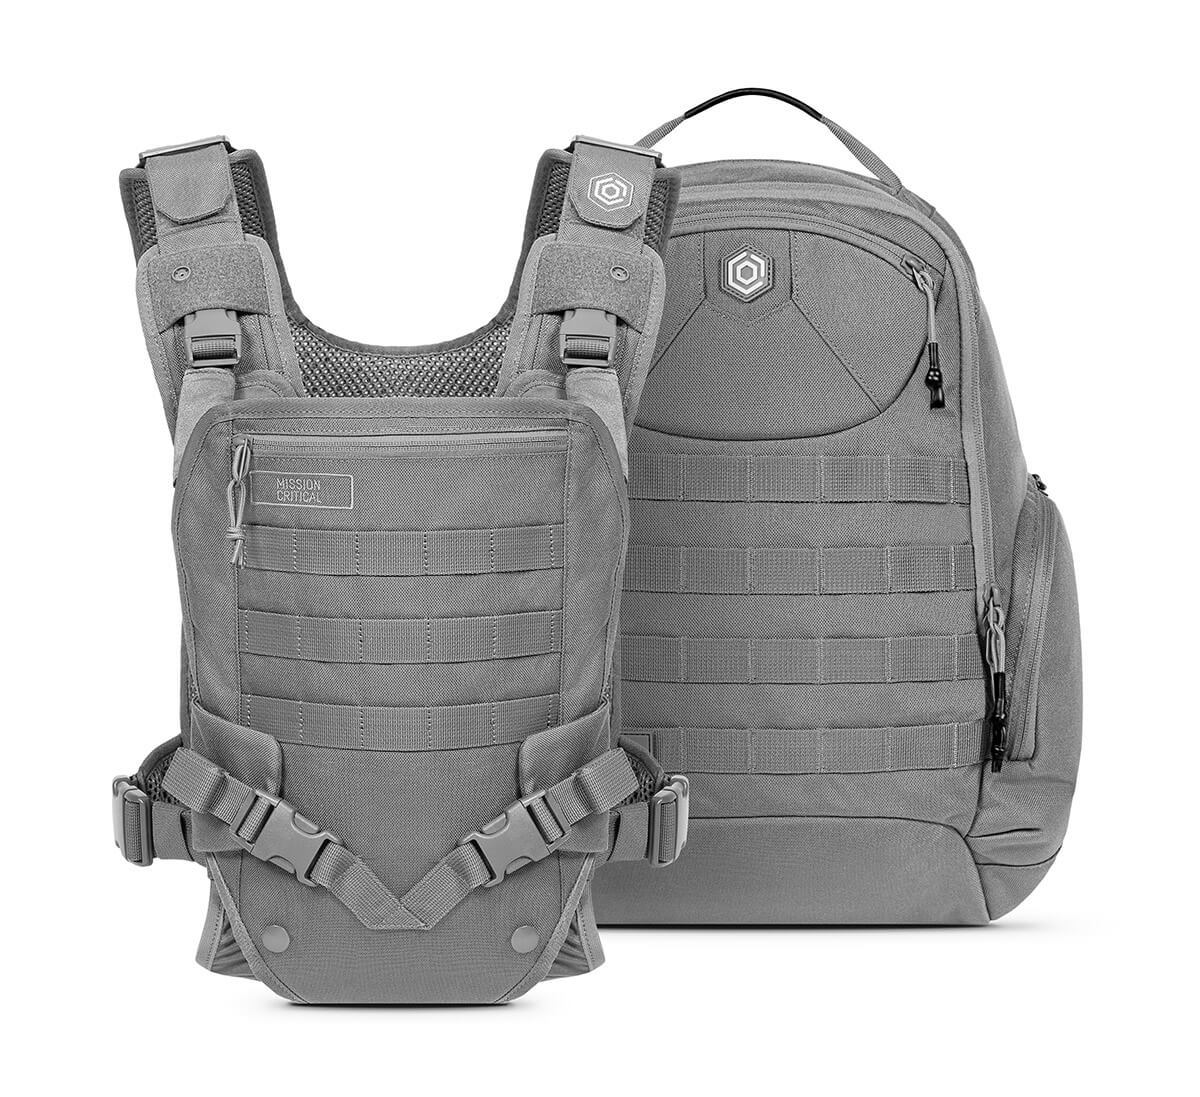 mission critical daypack